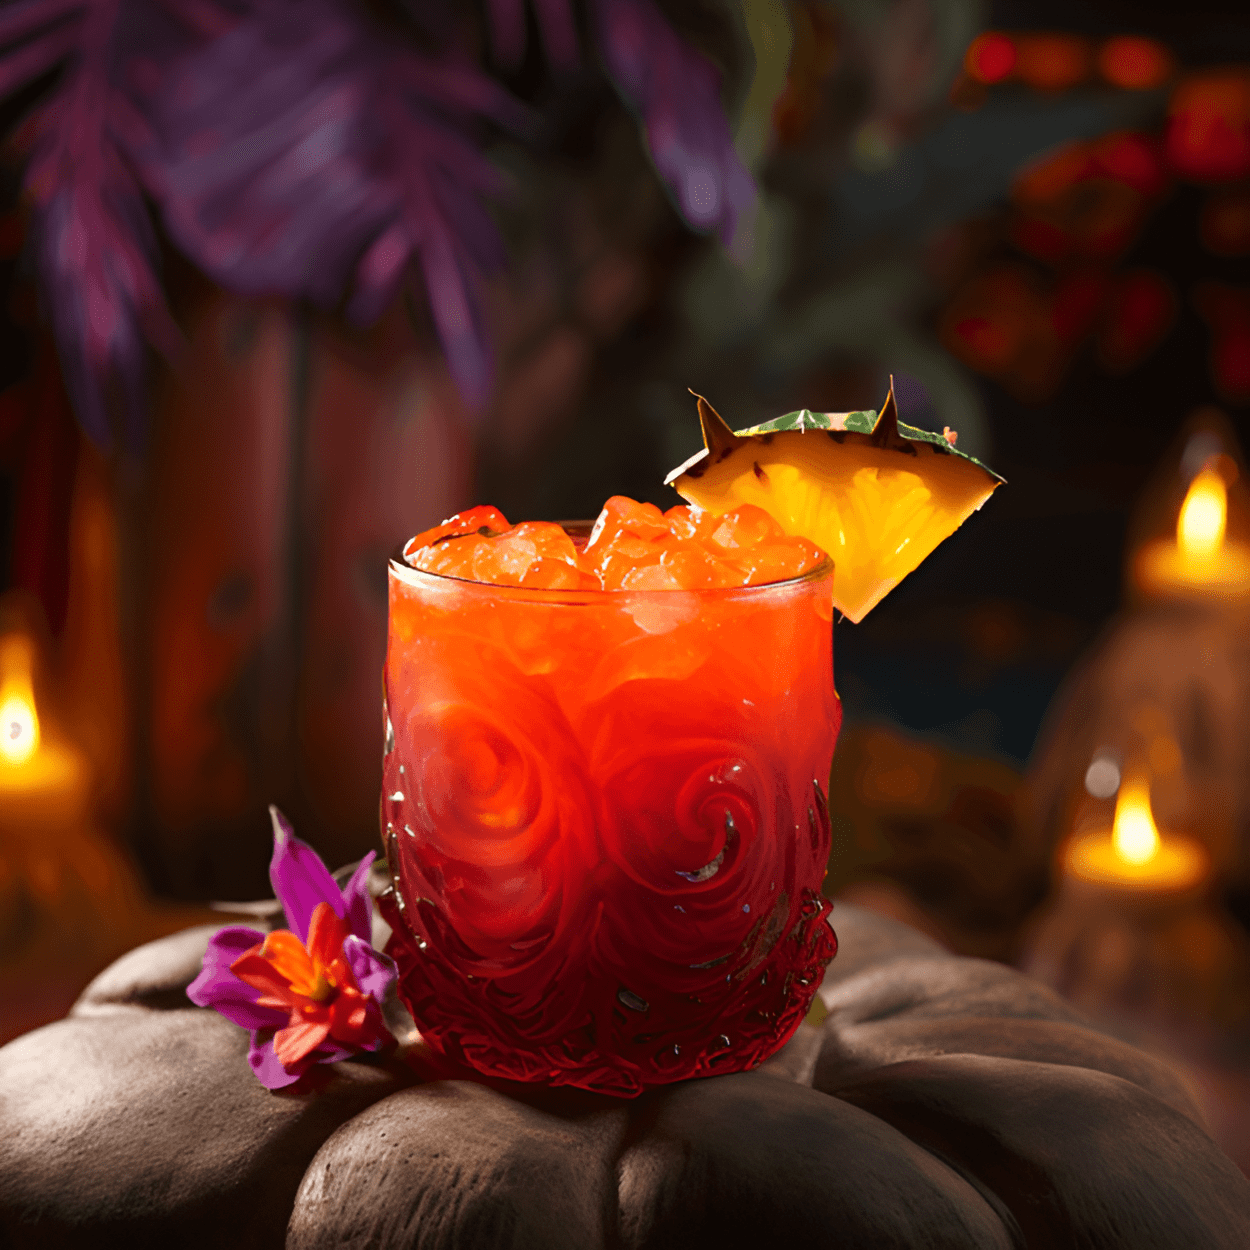 Volcano Cocktail Recipe - The Volcano cocktail has a complex and fruity taste, with a perfect balance of sweet, sour, and slightly spicy flavors. The combination of rum, fruit juices, and grenadine creates a tropical and refreshing taste, while the cinnamon adds a warm and spicy kick.